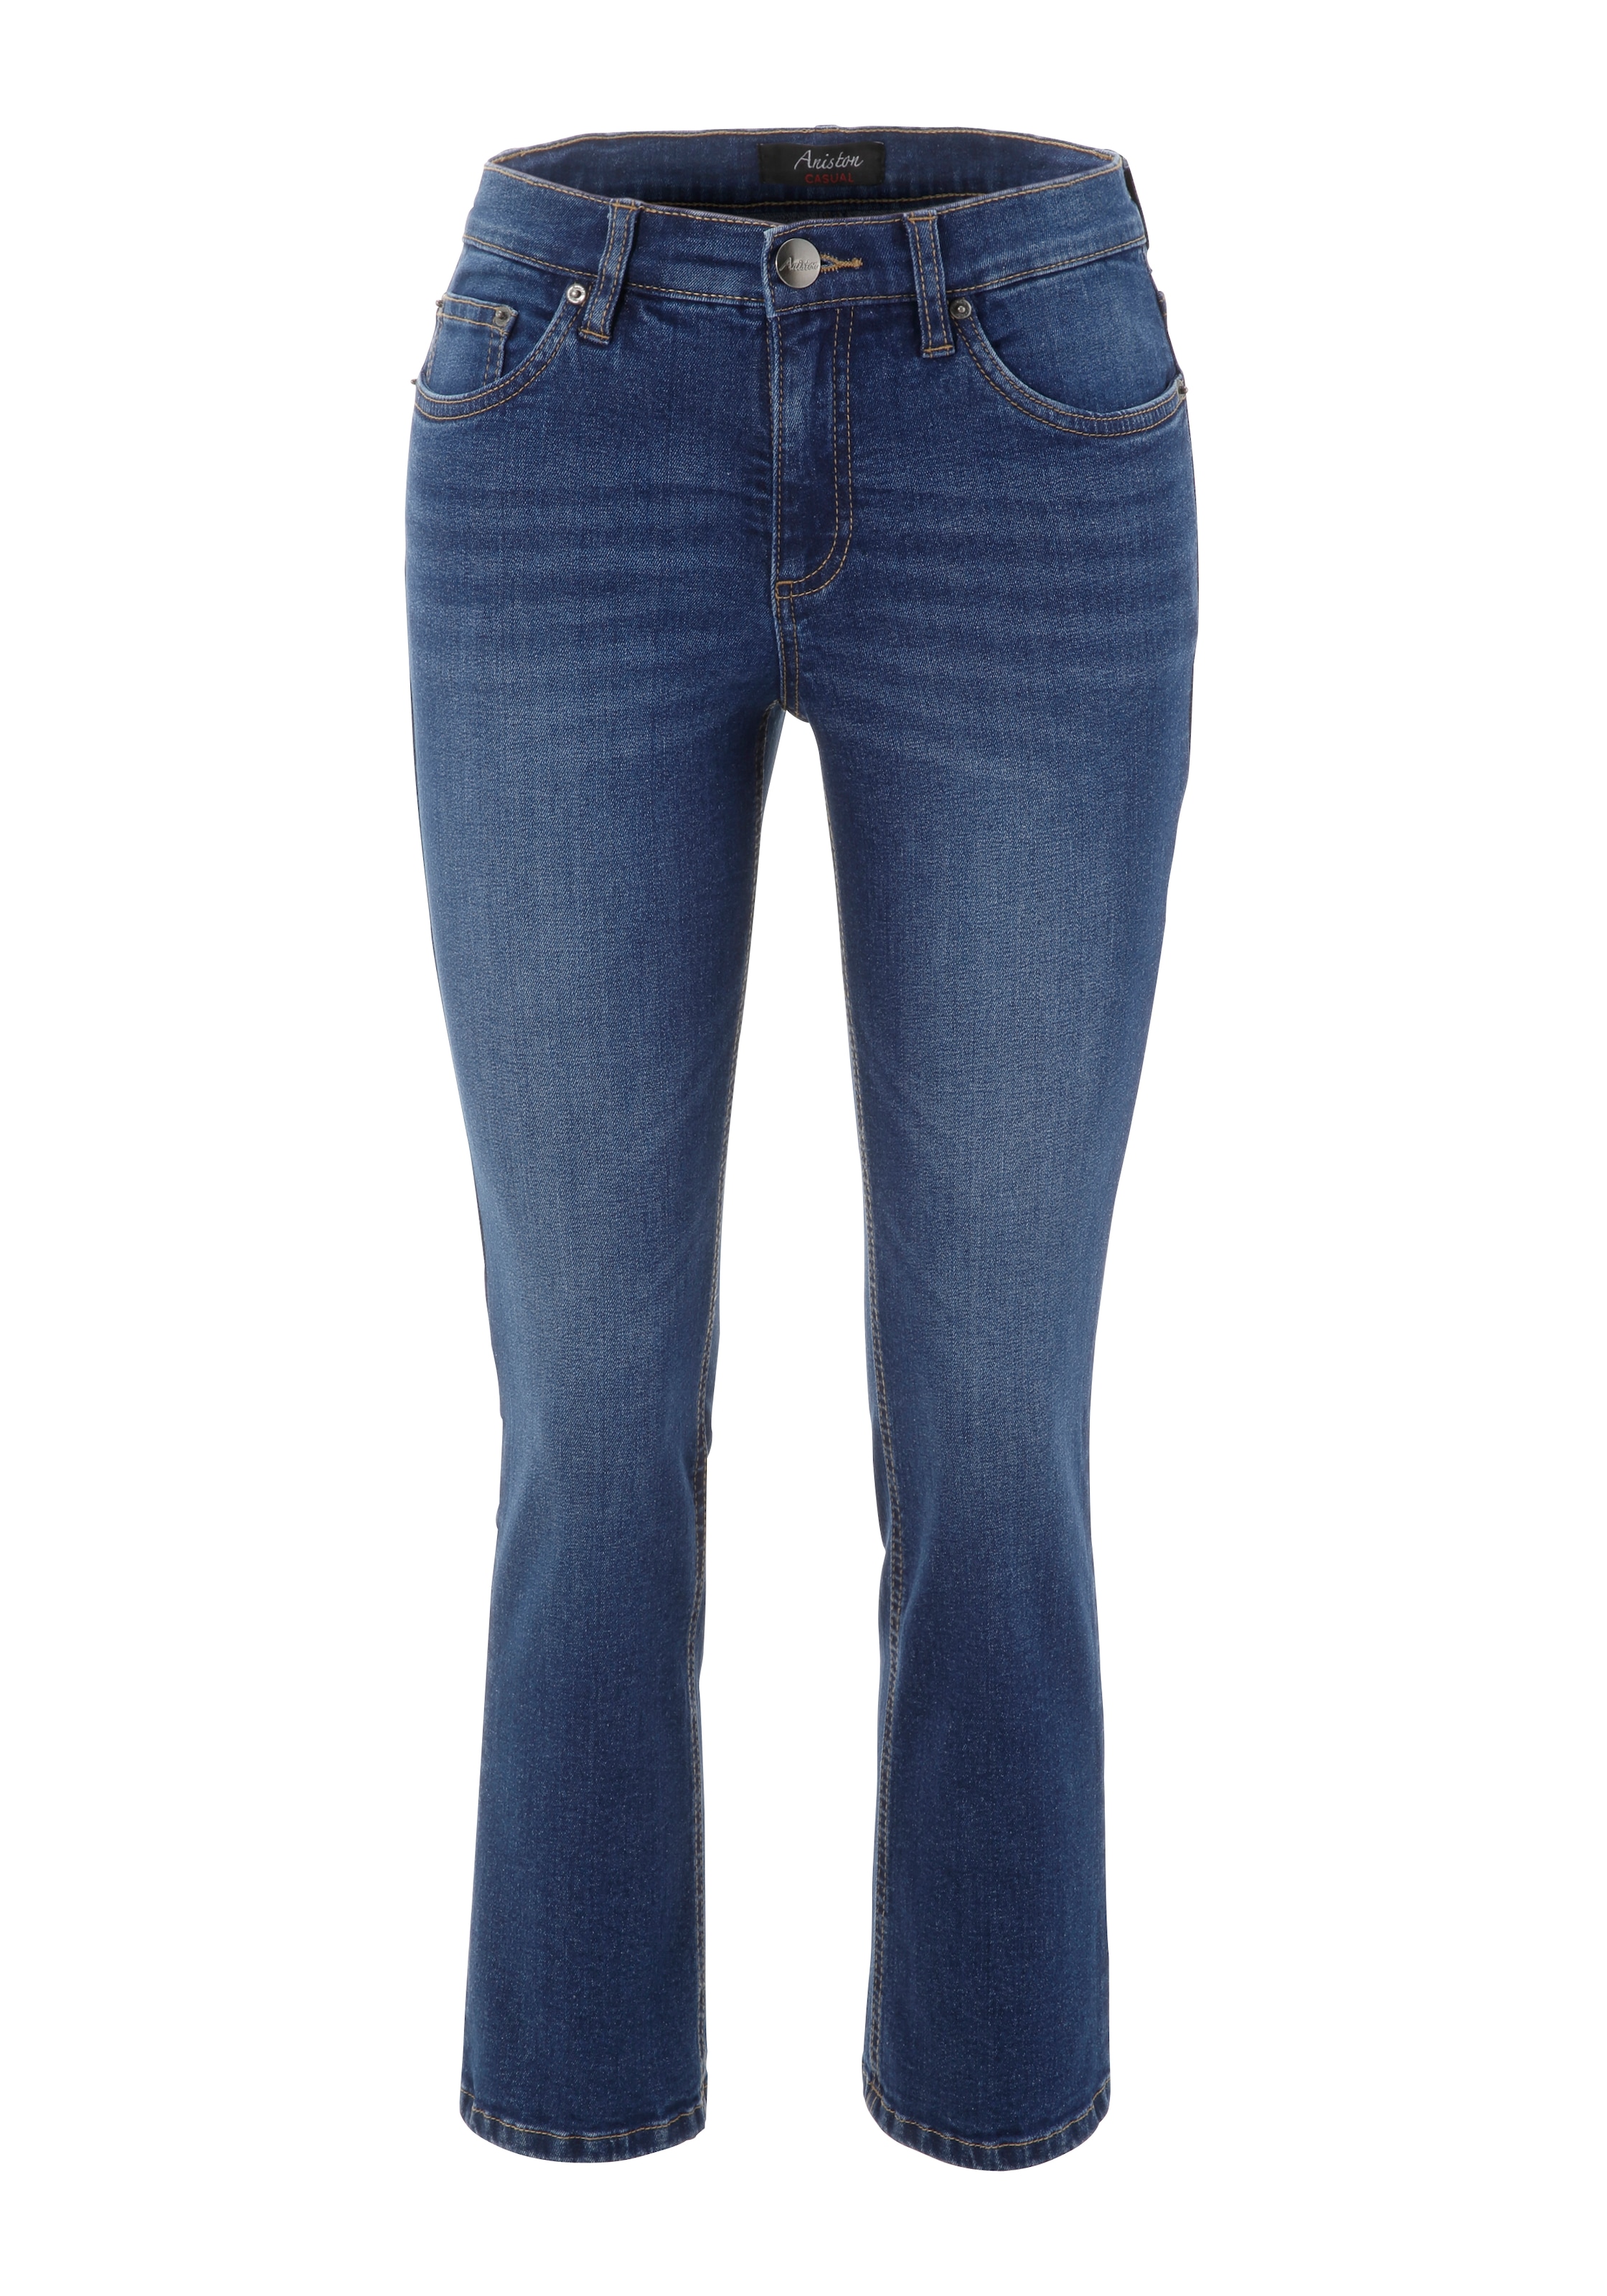 Aniston CASUAL trendiger bei online 7/8-Länge OTTO Bootcut-Jeans, in